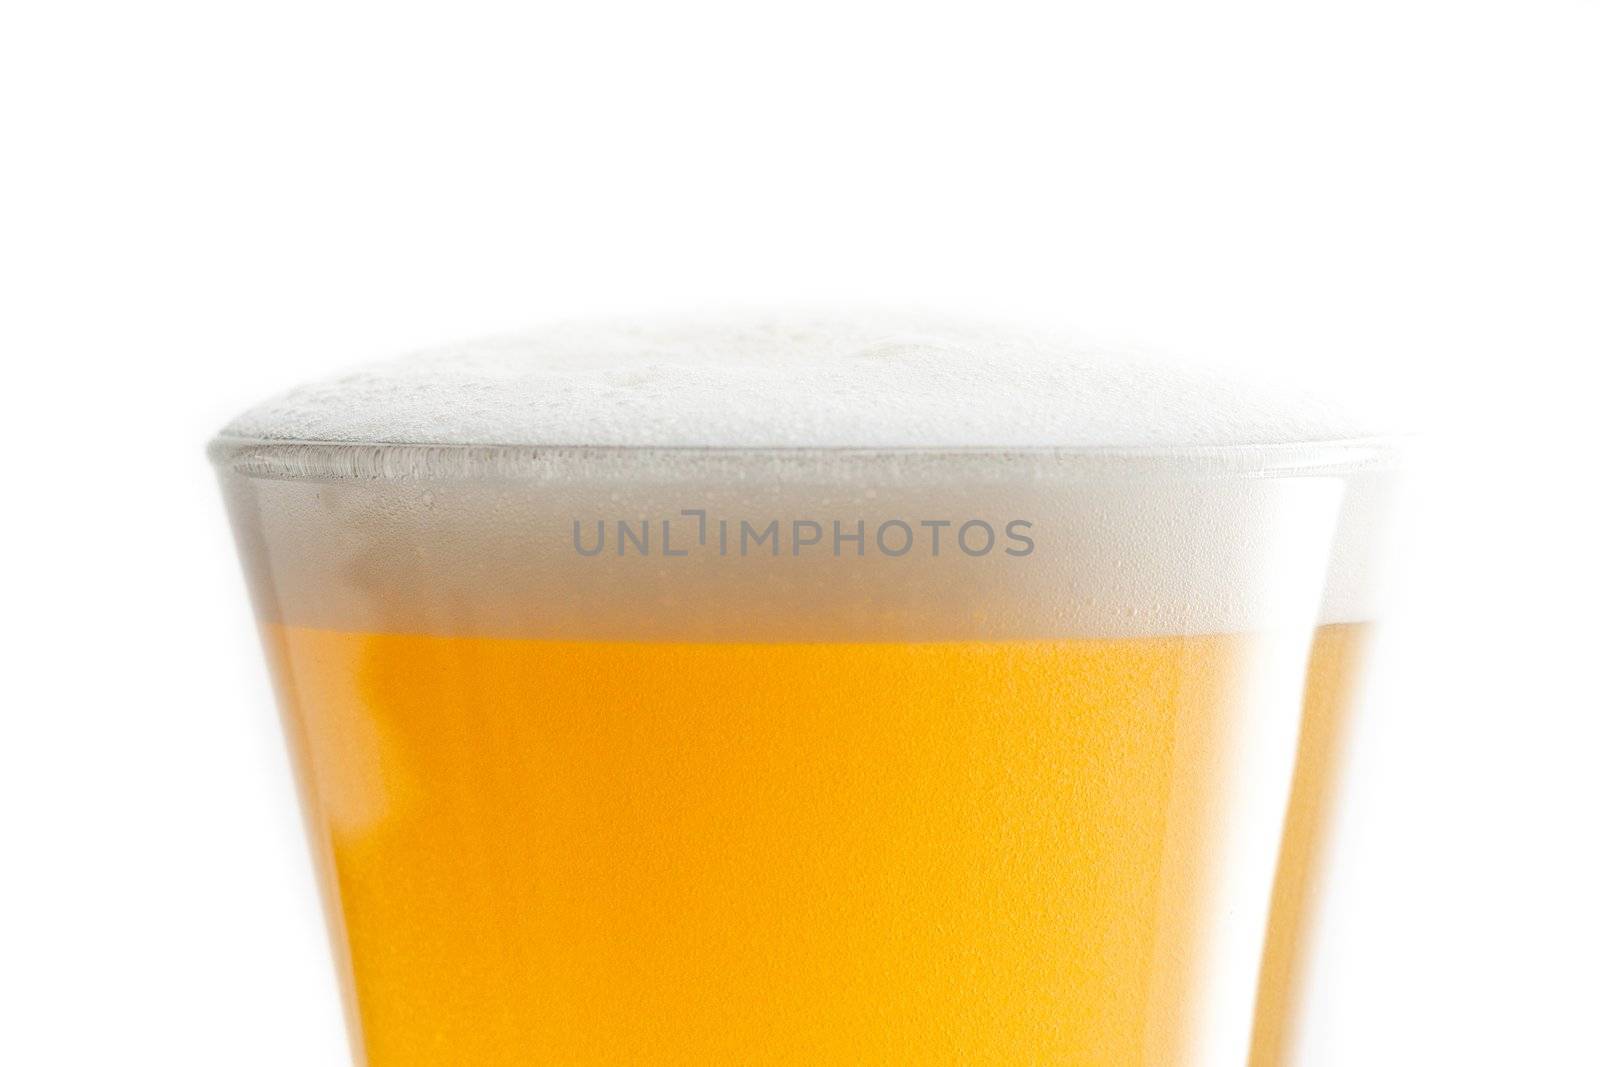 Full glass of beer against a white background